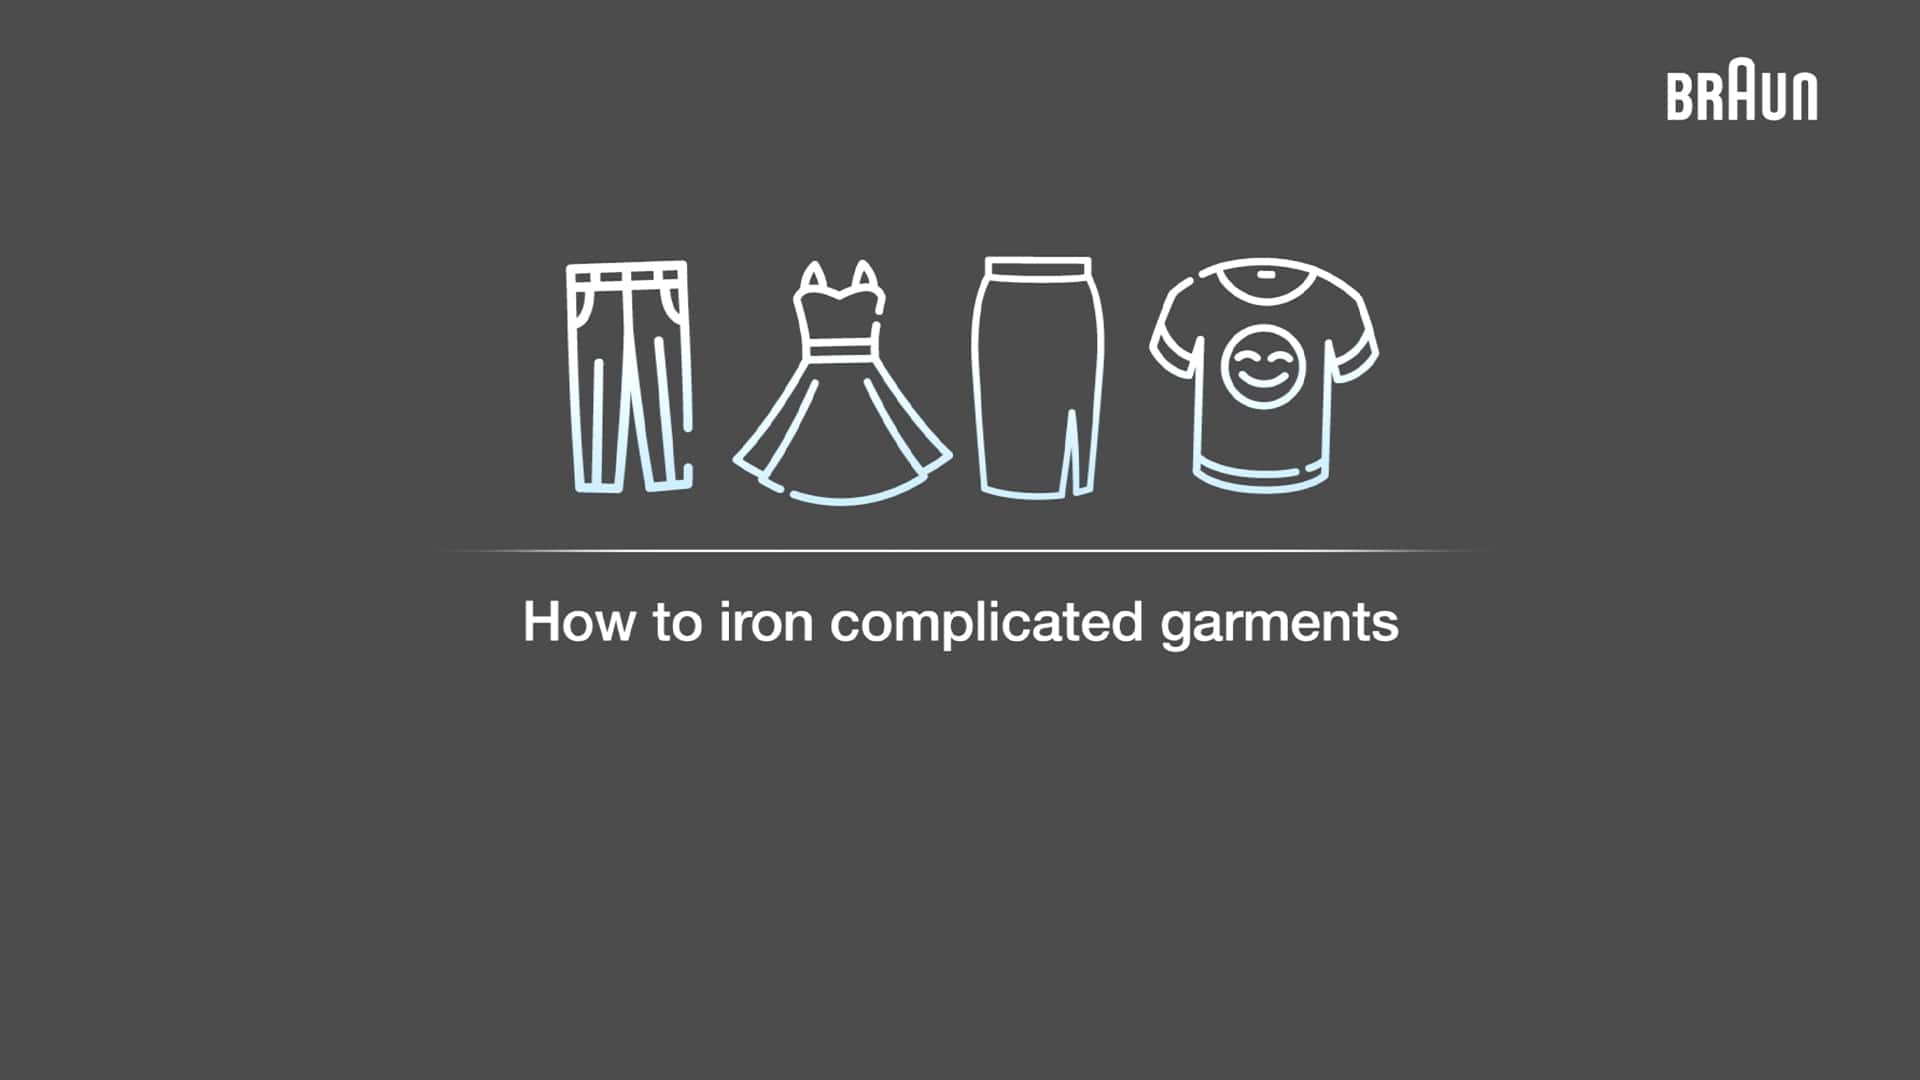 Braun_Cover_Image_How_to_Iron_complicated_Garments_1920x1080.jpg